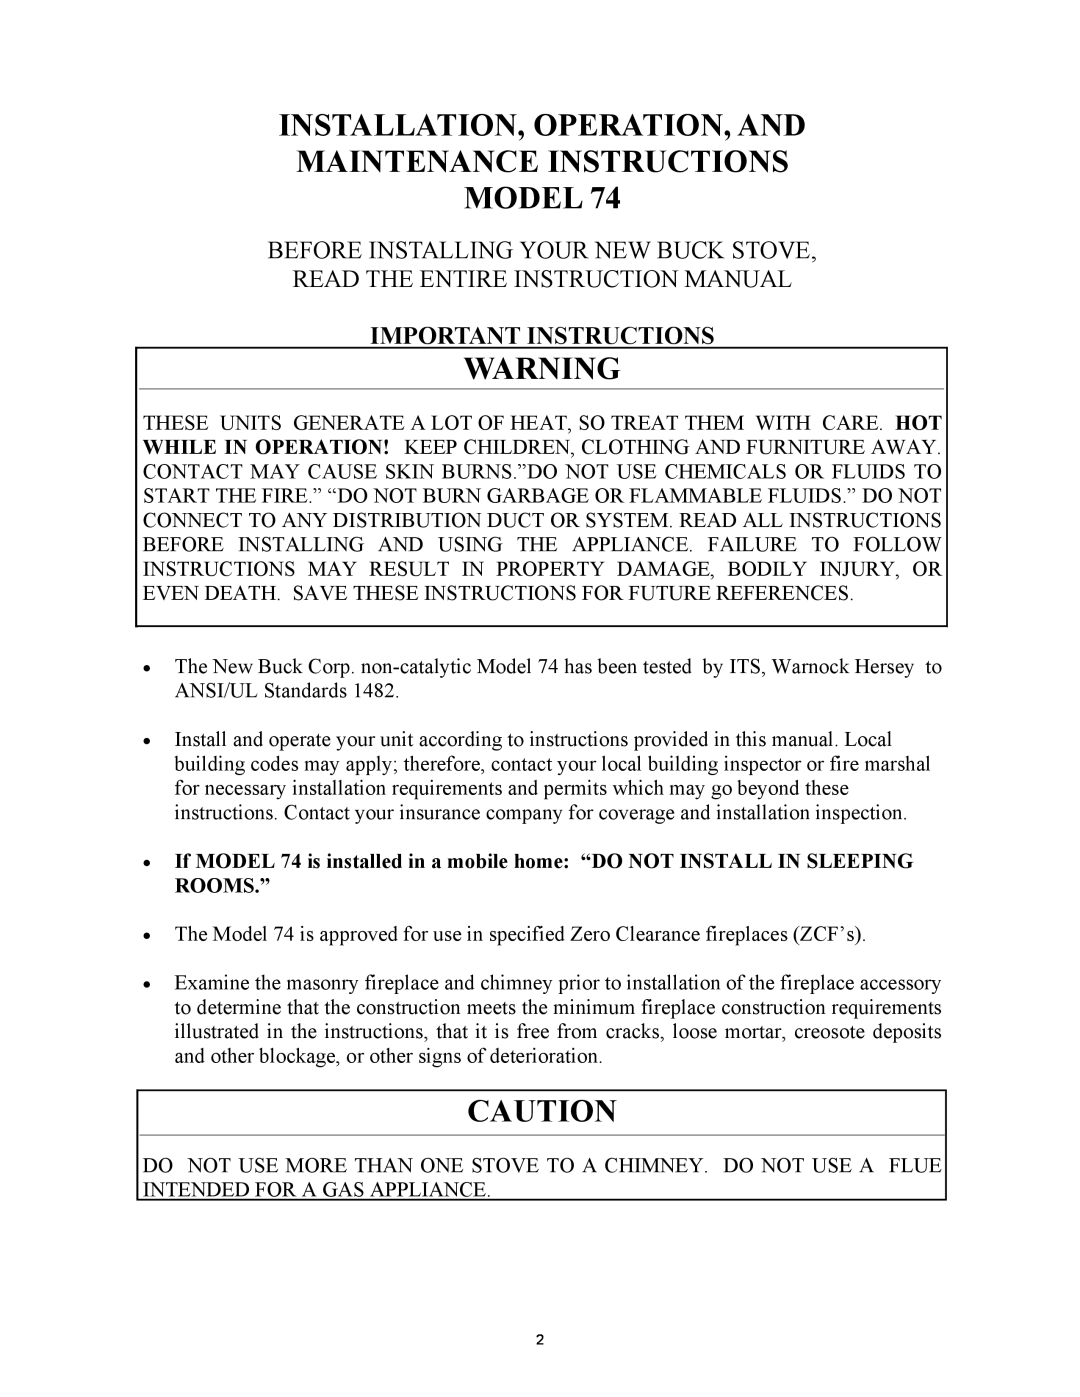 New Buck Corporation 74 Installation, Operation, And, Maintenance Instructions Model, Important Instructions 